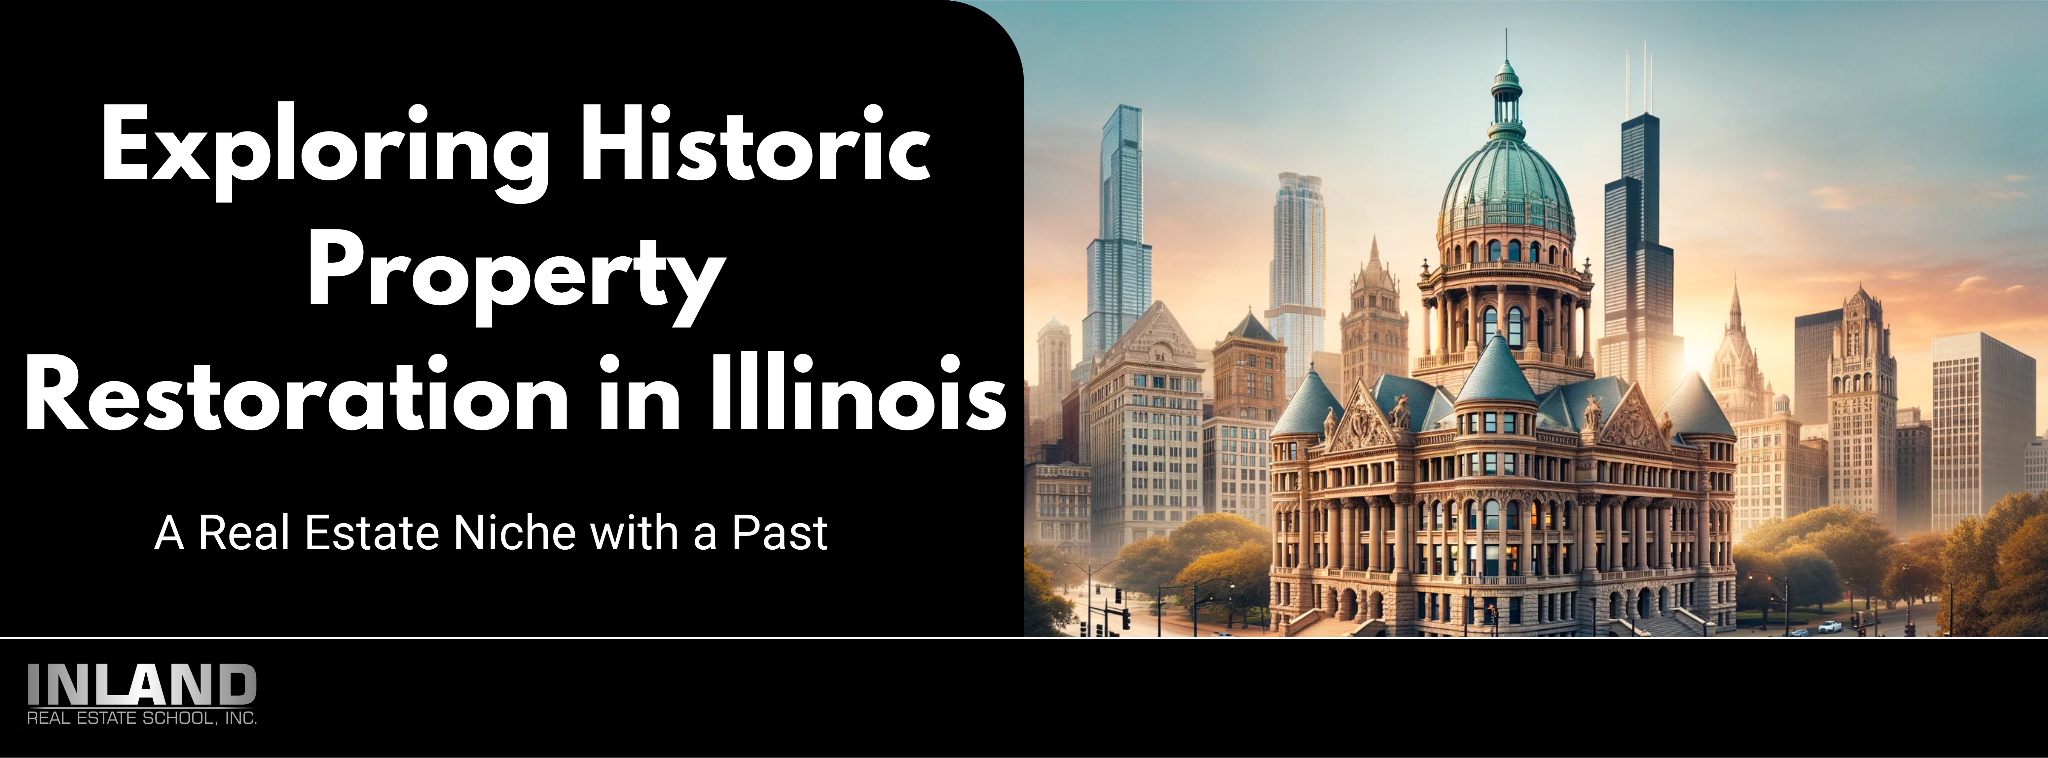 Exploring Historic Property Restoration in Illinois: A Real Estate Niche with a Past